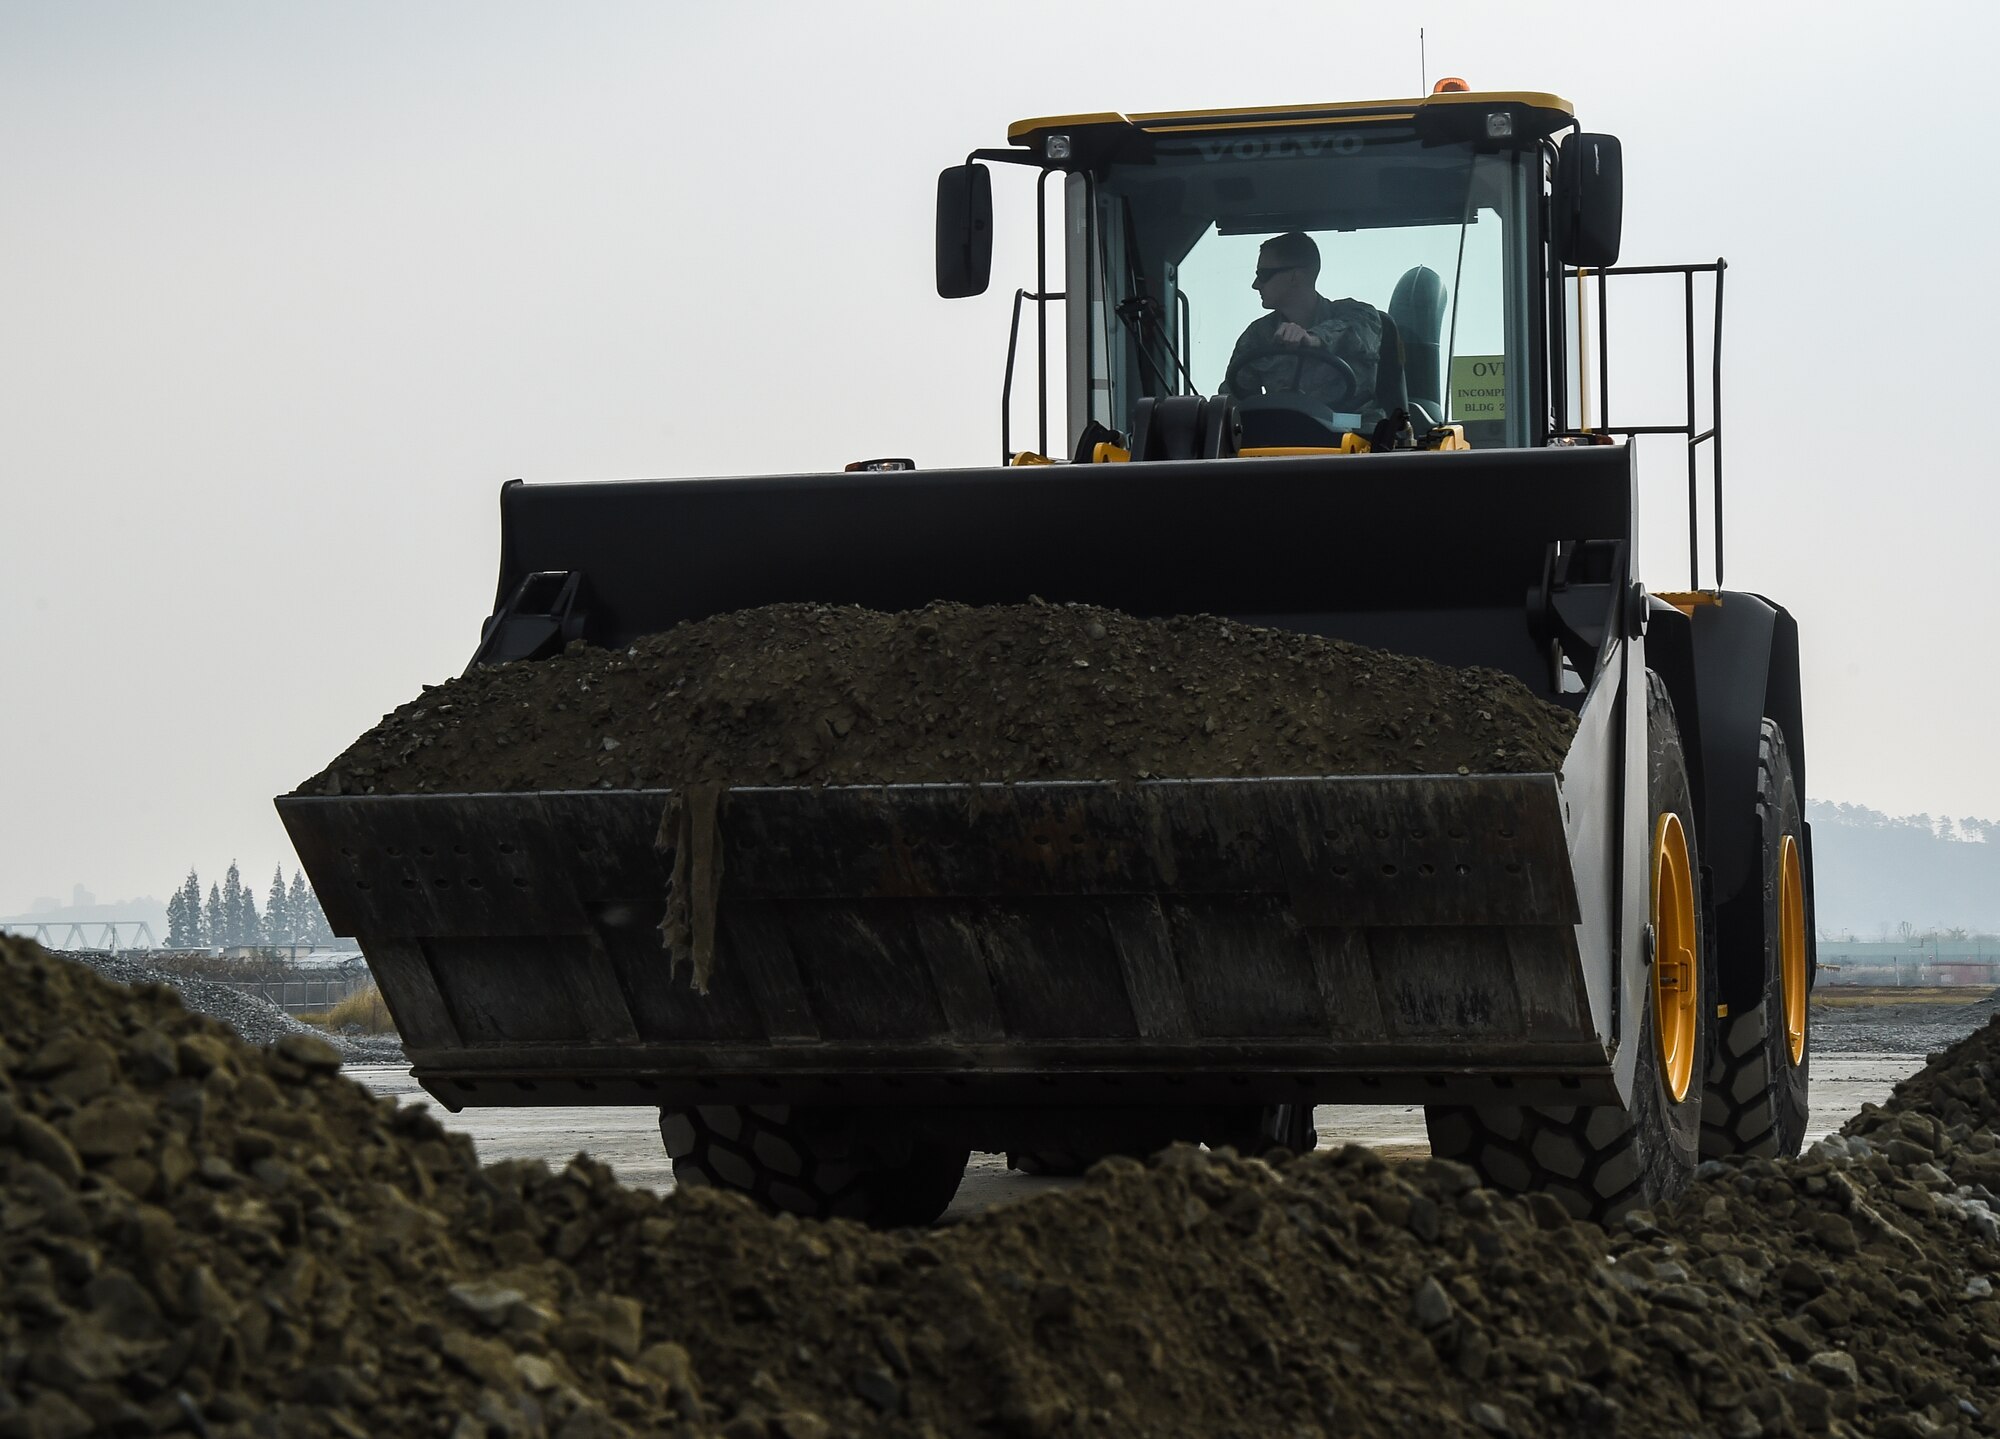 U.S. Air Force Senior Airman Ryan Boggess, 773d Civil Engineer Squadron, operates a front-end loader during a Rapid Airfield Damage Repair training exercise at Gwangju Air Base, Republic of Korea., Nov. 8, 2017. Approximately forty U.S. Airmen from the 773d Civil Engineer Squadron at Joint Base Elmendorf-Richardson, Alaska, and 40 Republic of Korea Airmen from Gwangju trained together for a week to learn a new runway repair process for wartime contingencies. The bilateral training exercise enhanced interoperability and strengthen partnerships in the Indo-Asia Pacific region. (U.S. Air Force photo by Senior Airman Curt Beach)